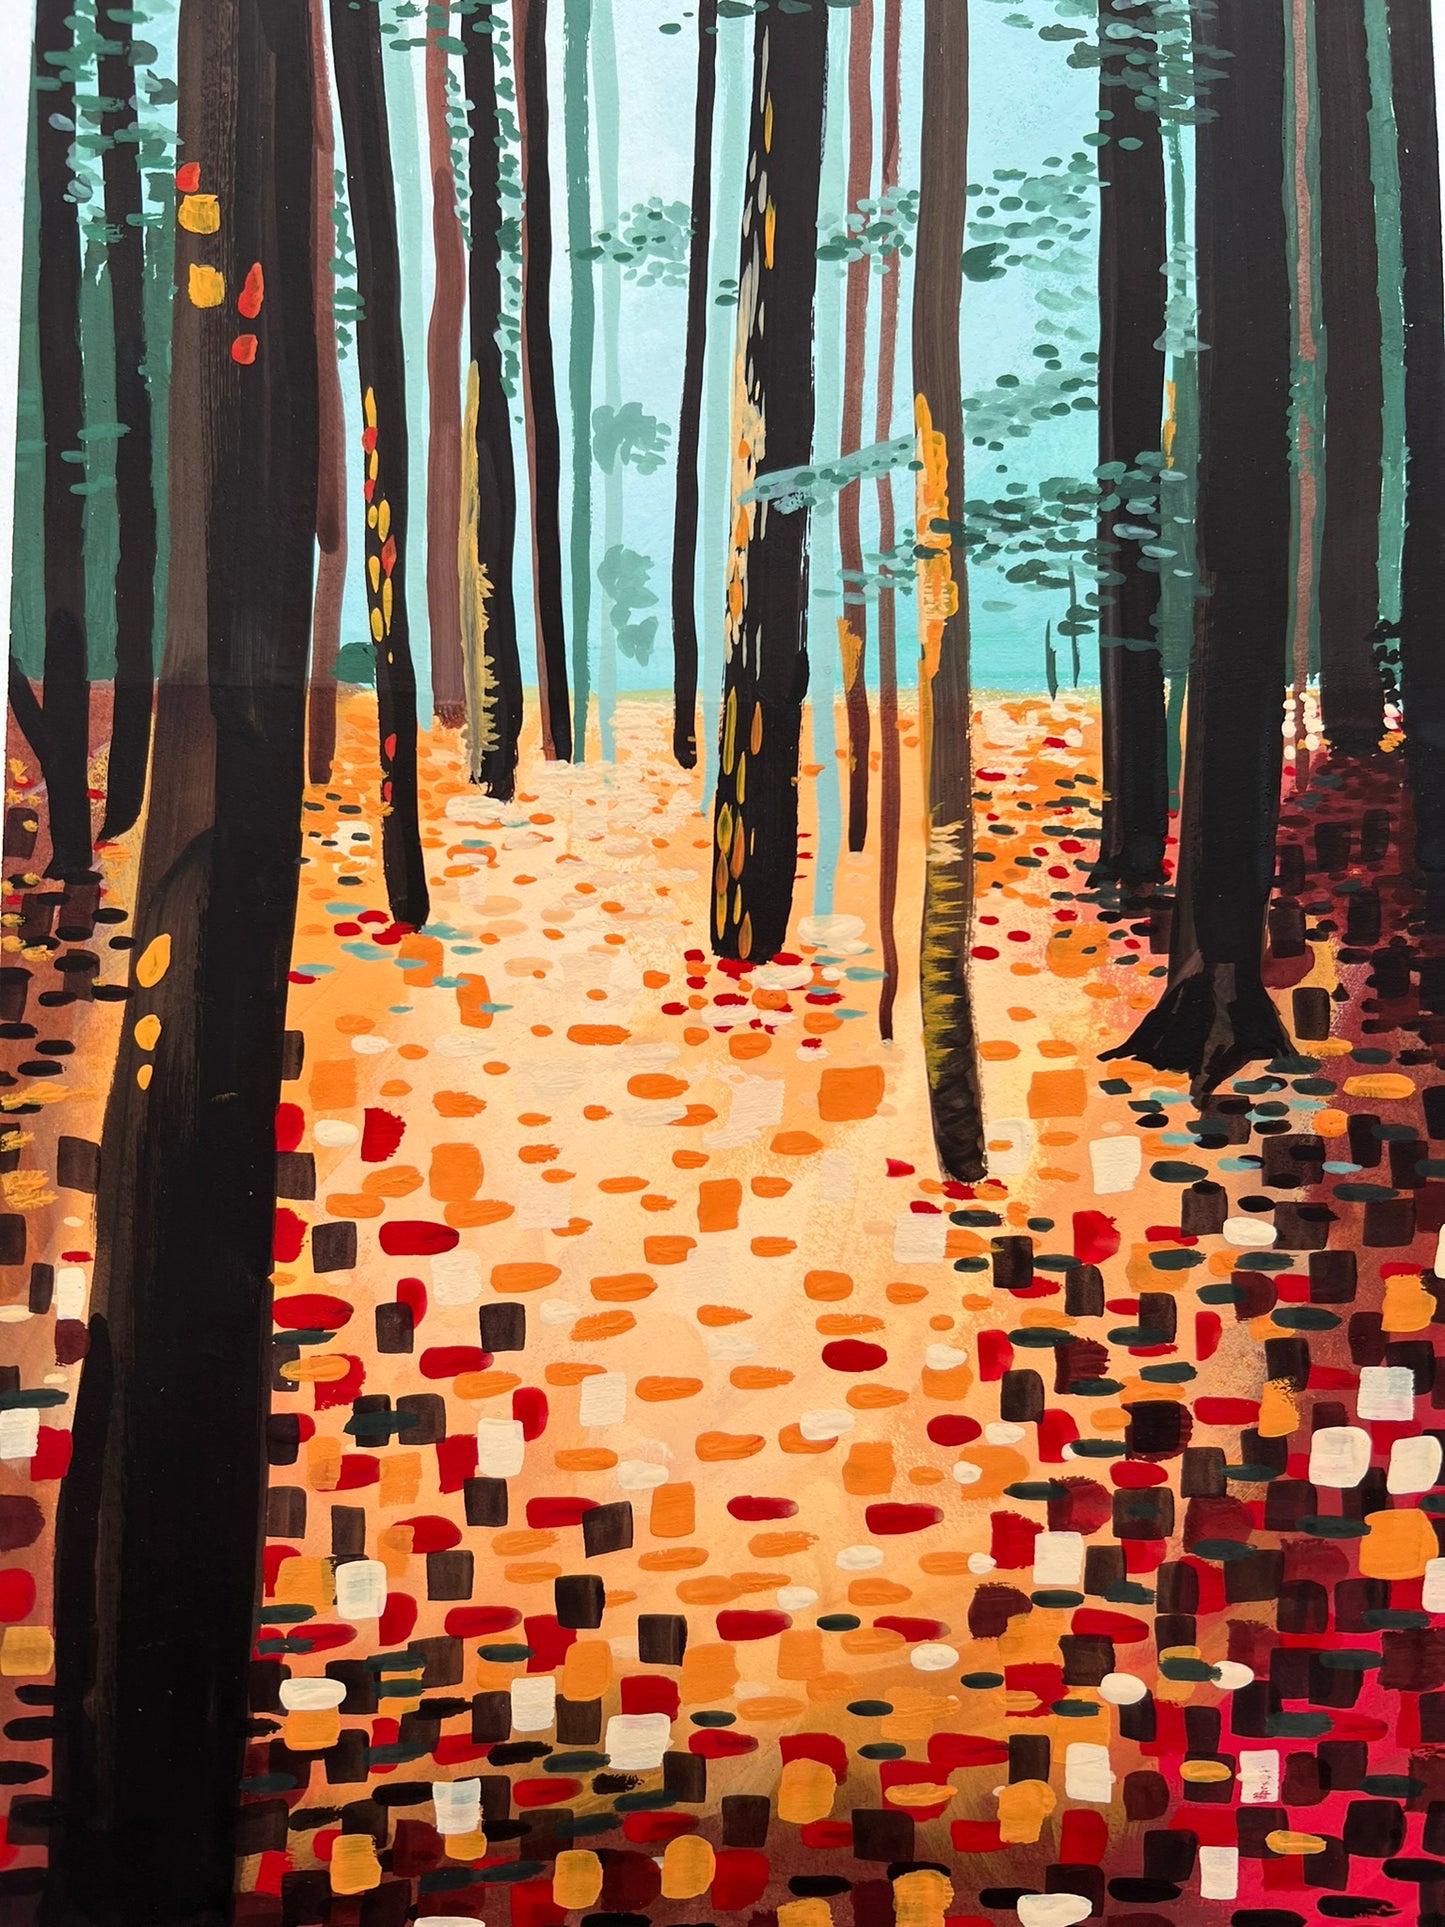 Abstract woods gouache painting